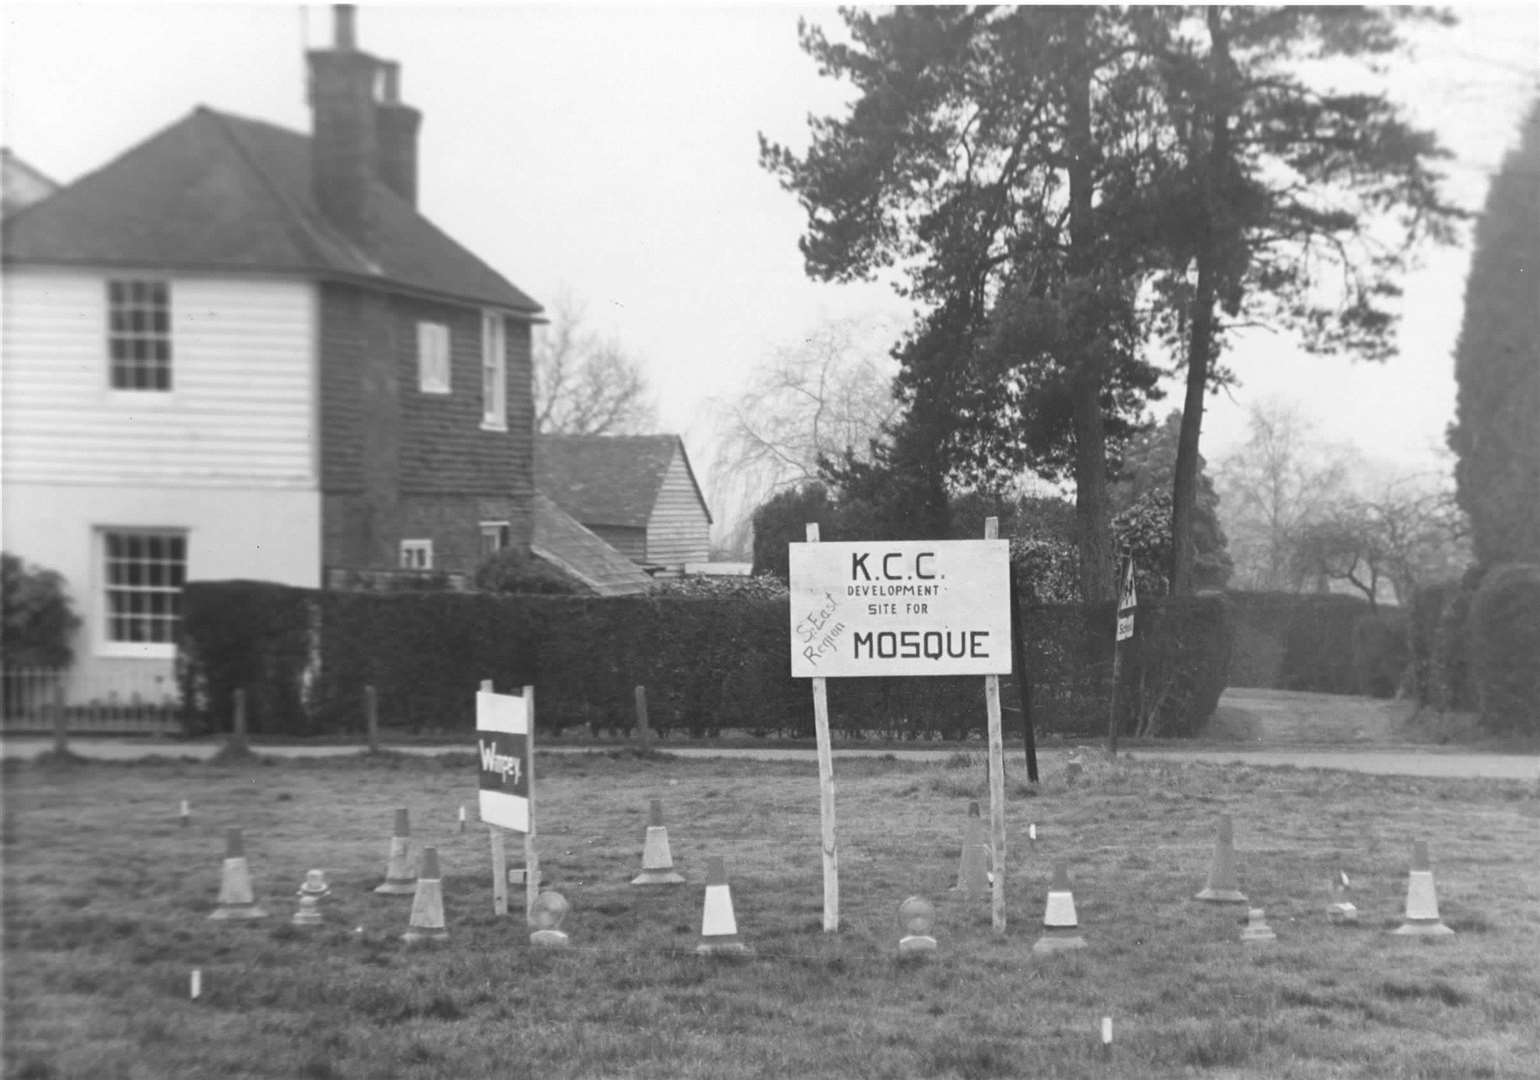 Notices of plans to build a mosque on a village green had villagers fooled in Sandhurst, on April Fool's Day 1983